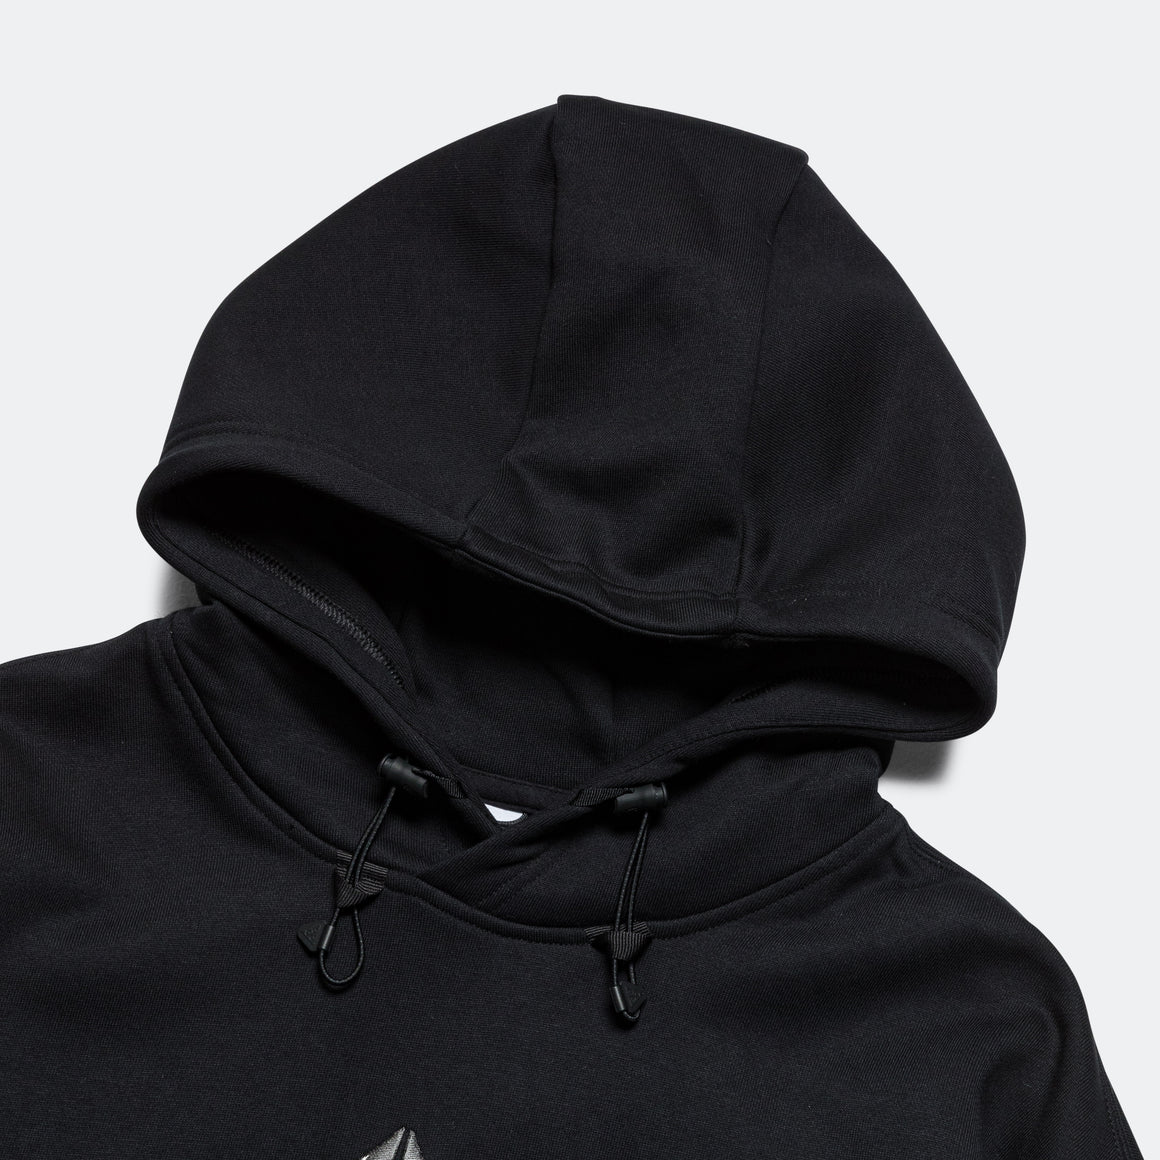 Nike ACG - 'Lungs' Therma-FIT Tuff Fleece Hoodie - Black/Anthracite-Summit White - UP THERE